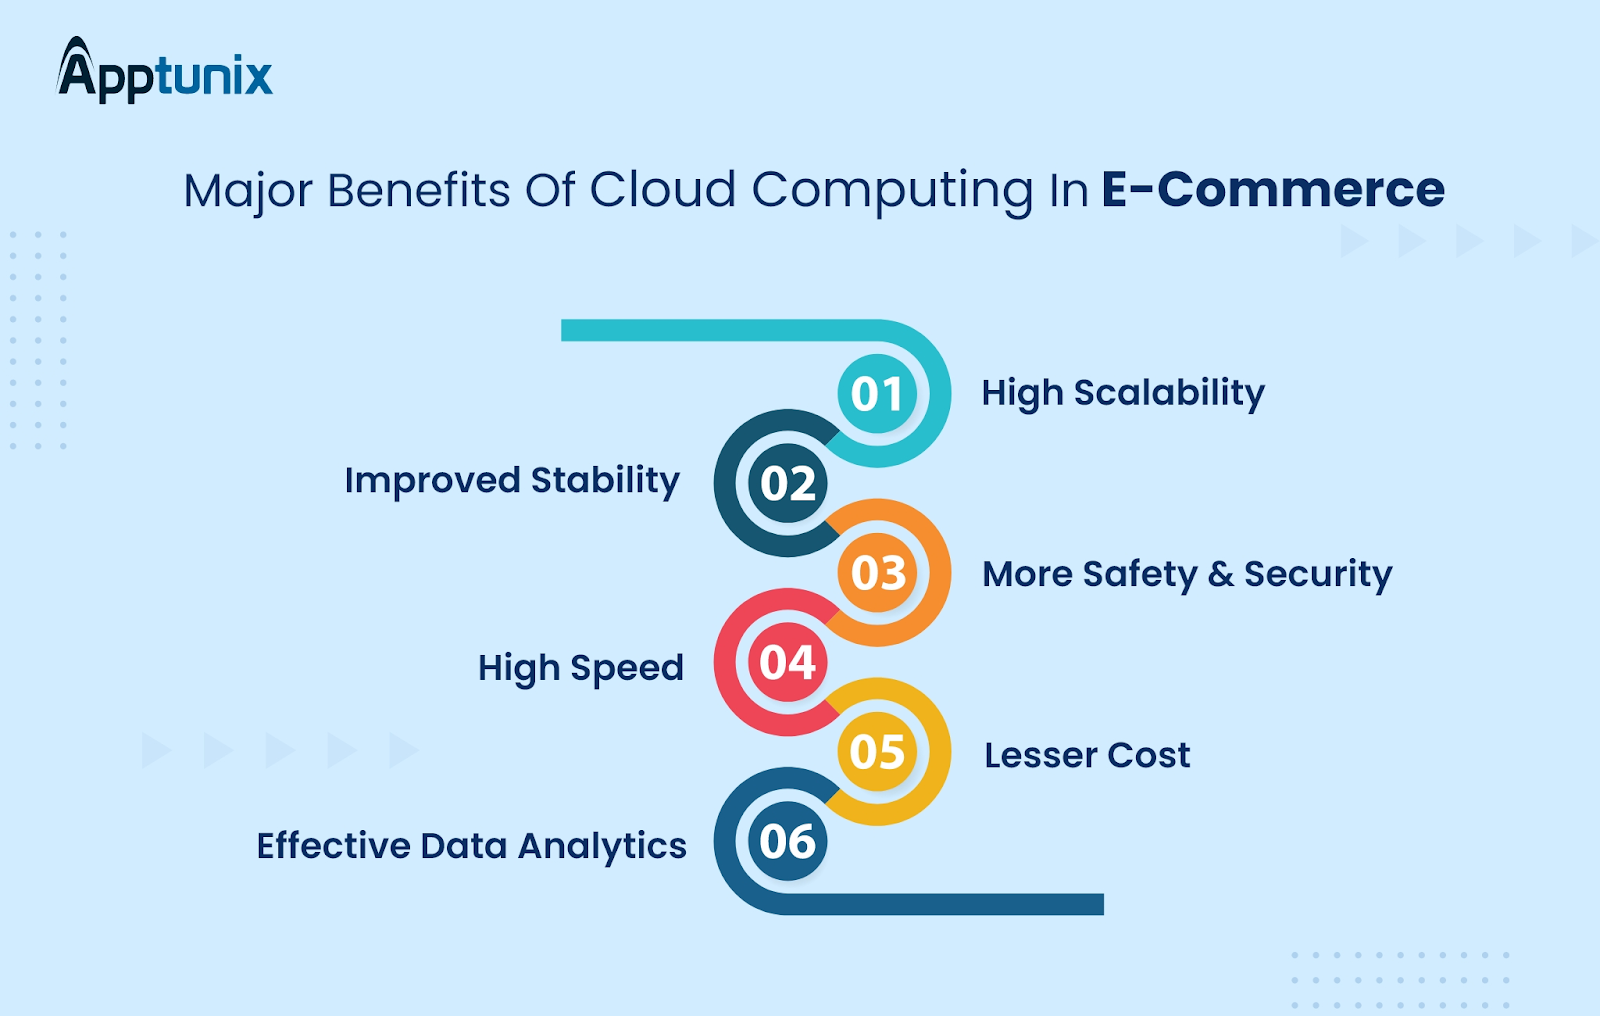 Major benefits of Cloud computing in E-commerce